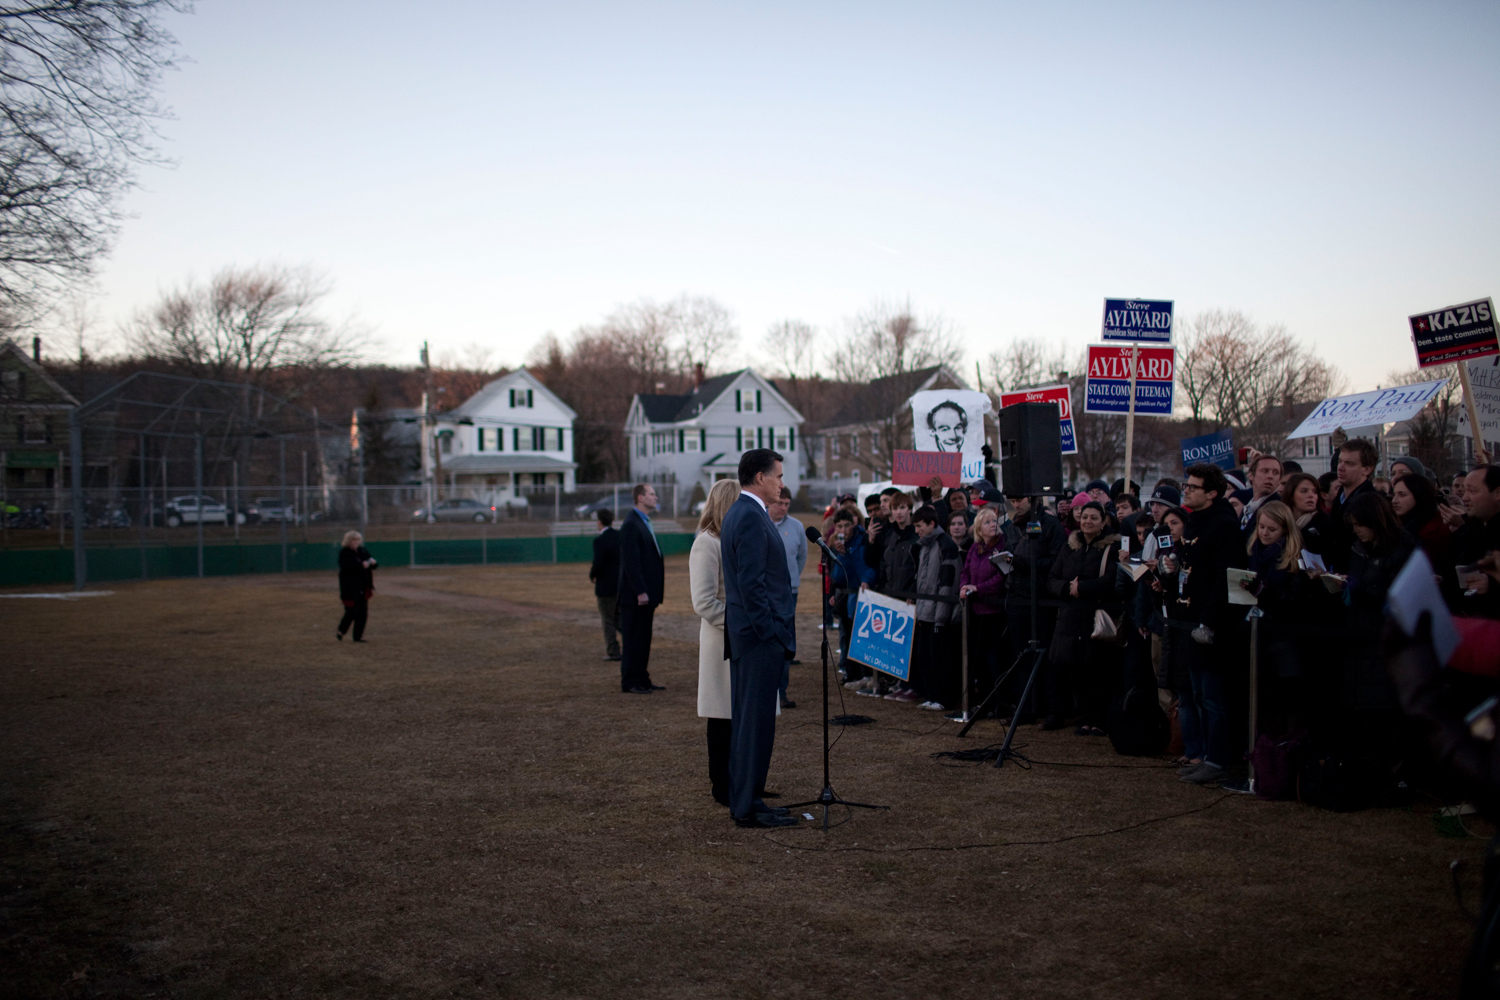 March 6, 2012. Republican presidential candidate Mitt Romney speaks at a baseball field after voting in the Massachusetts primary in Belmont, Mass.